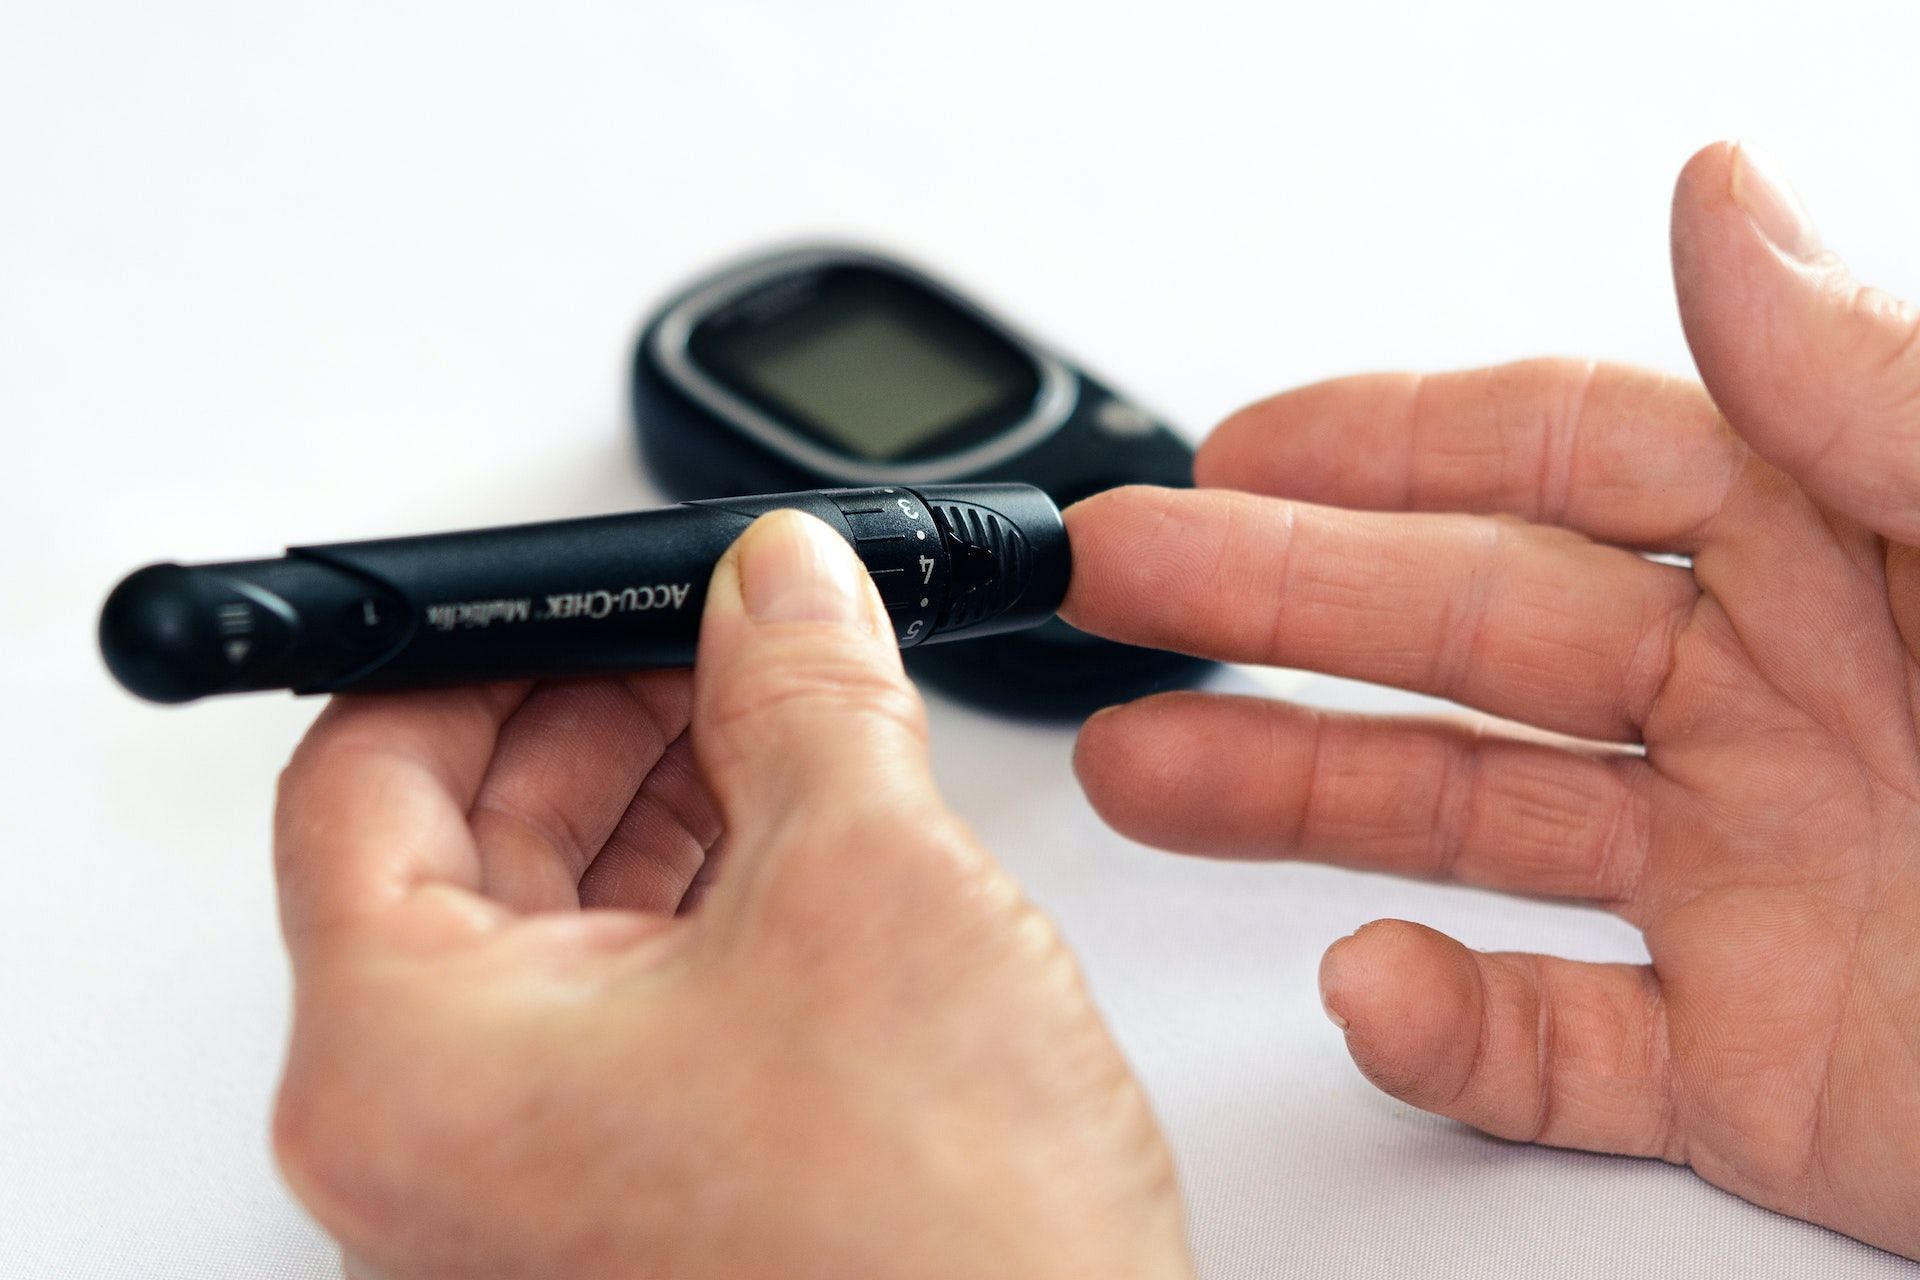 High blood sugar can cause pins and needles in hands. (Photo via Pexels/PhotoMIX Company)